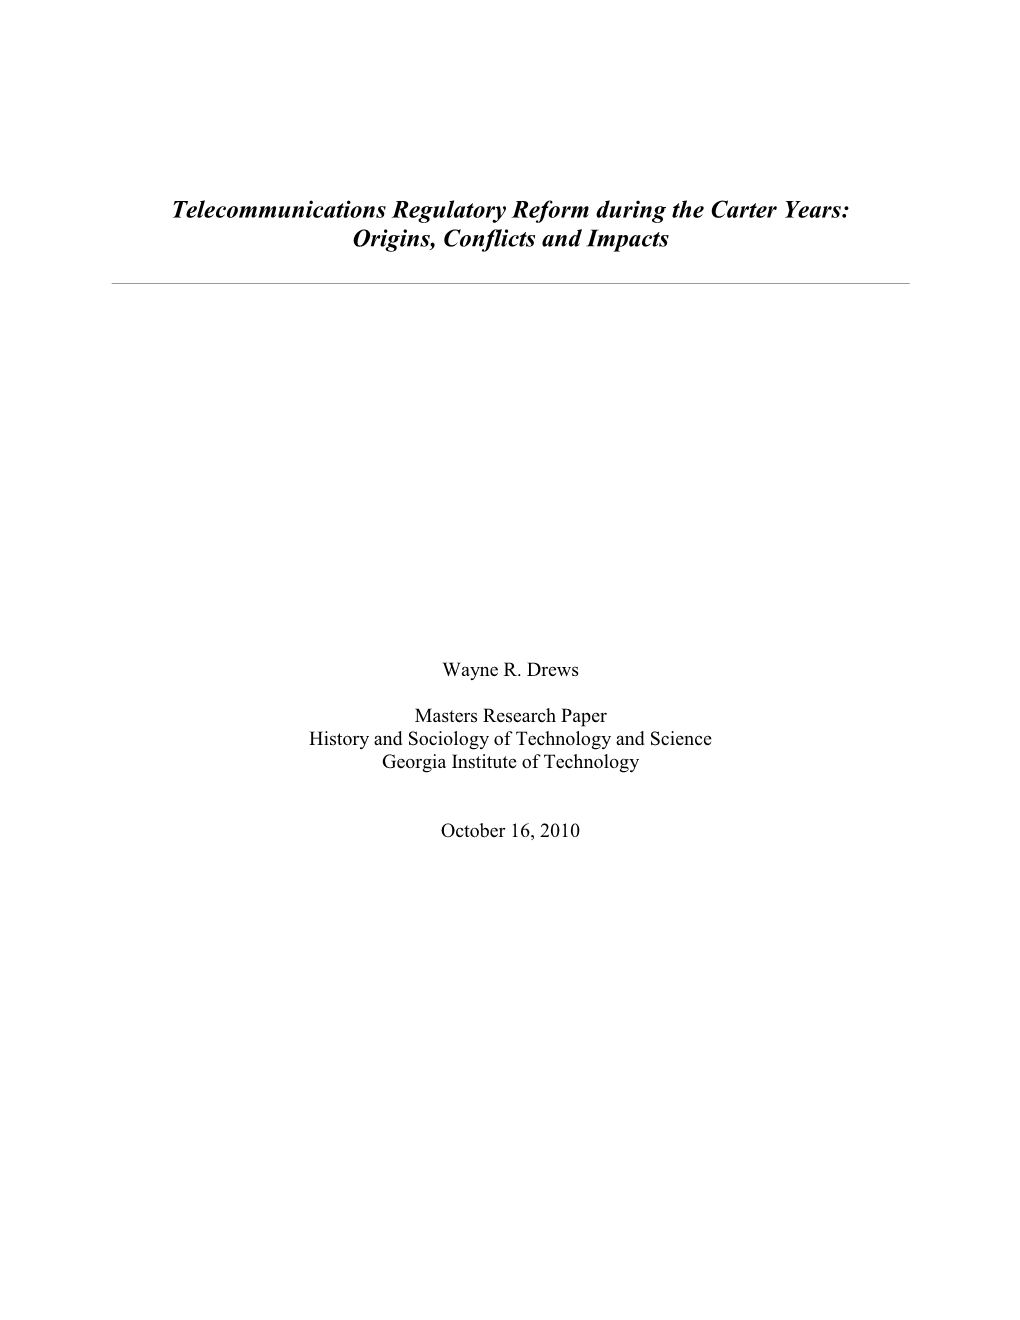 Telecommunications Regulatory Reform During the Carter Years: Origins, Conflicts and Impacts